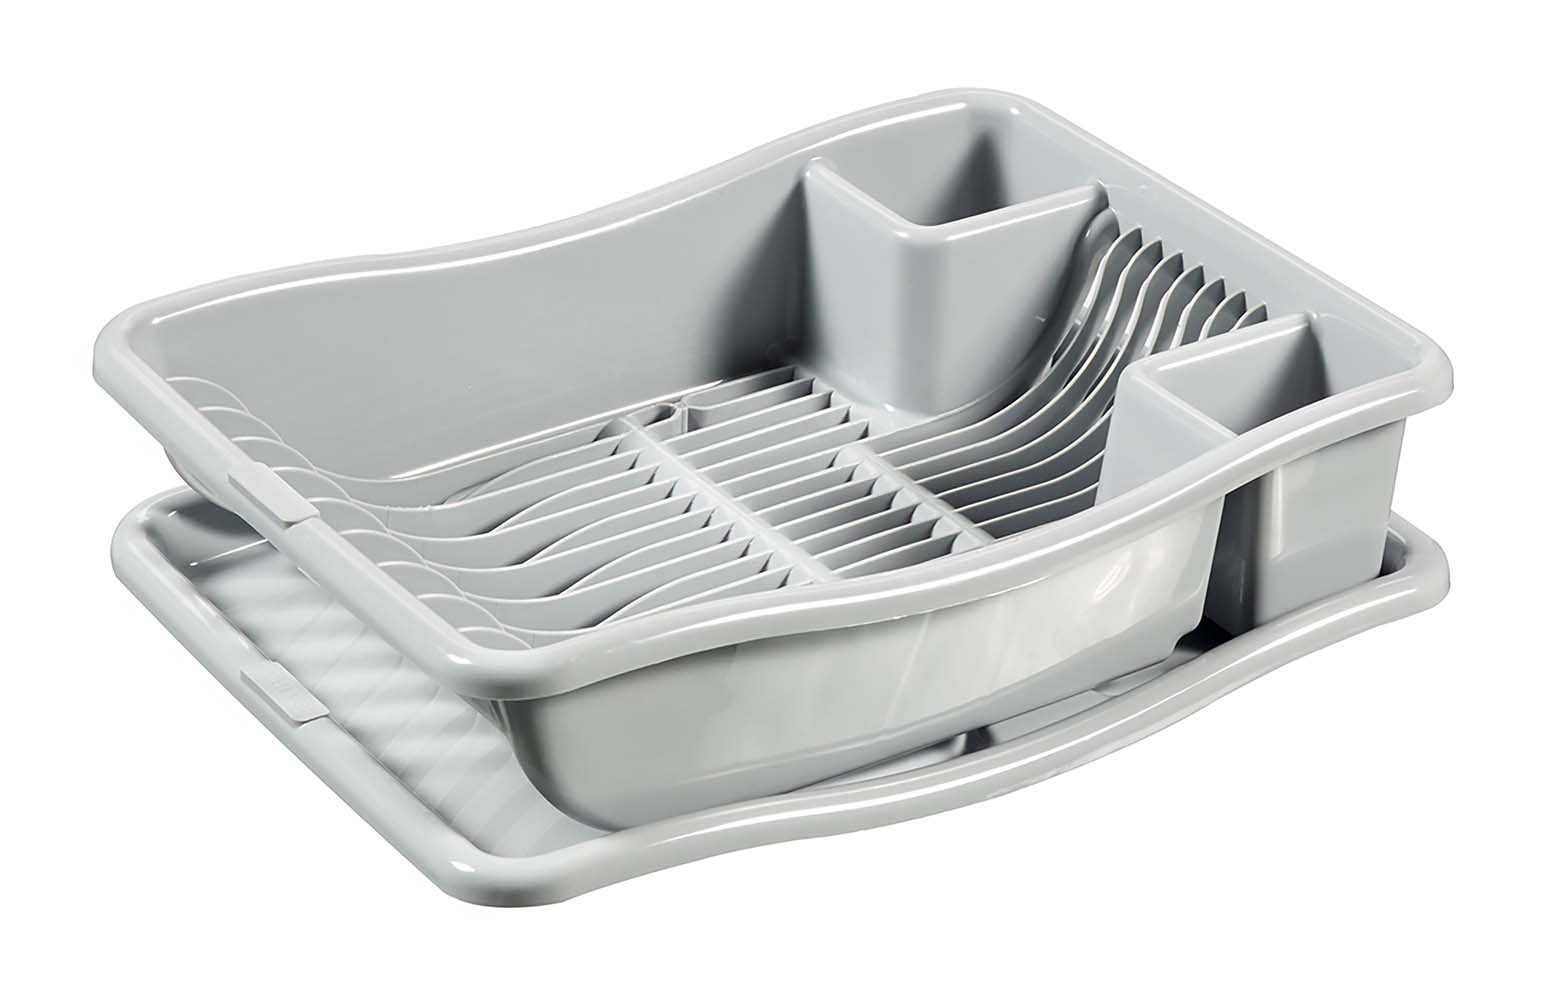 6302120 A compact dish rack. There is a tray to collect water underneath the dish rack.